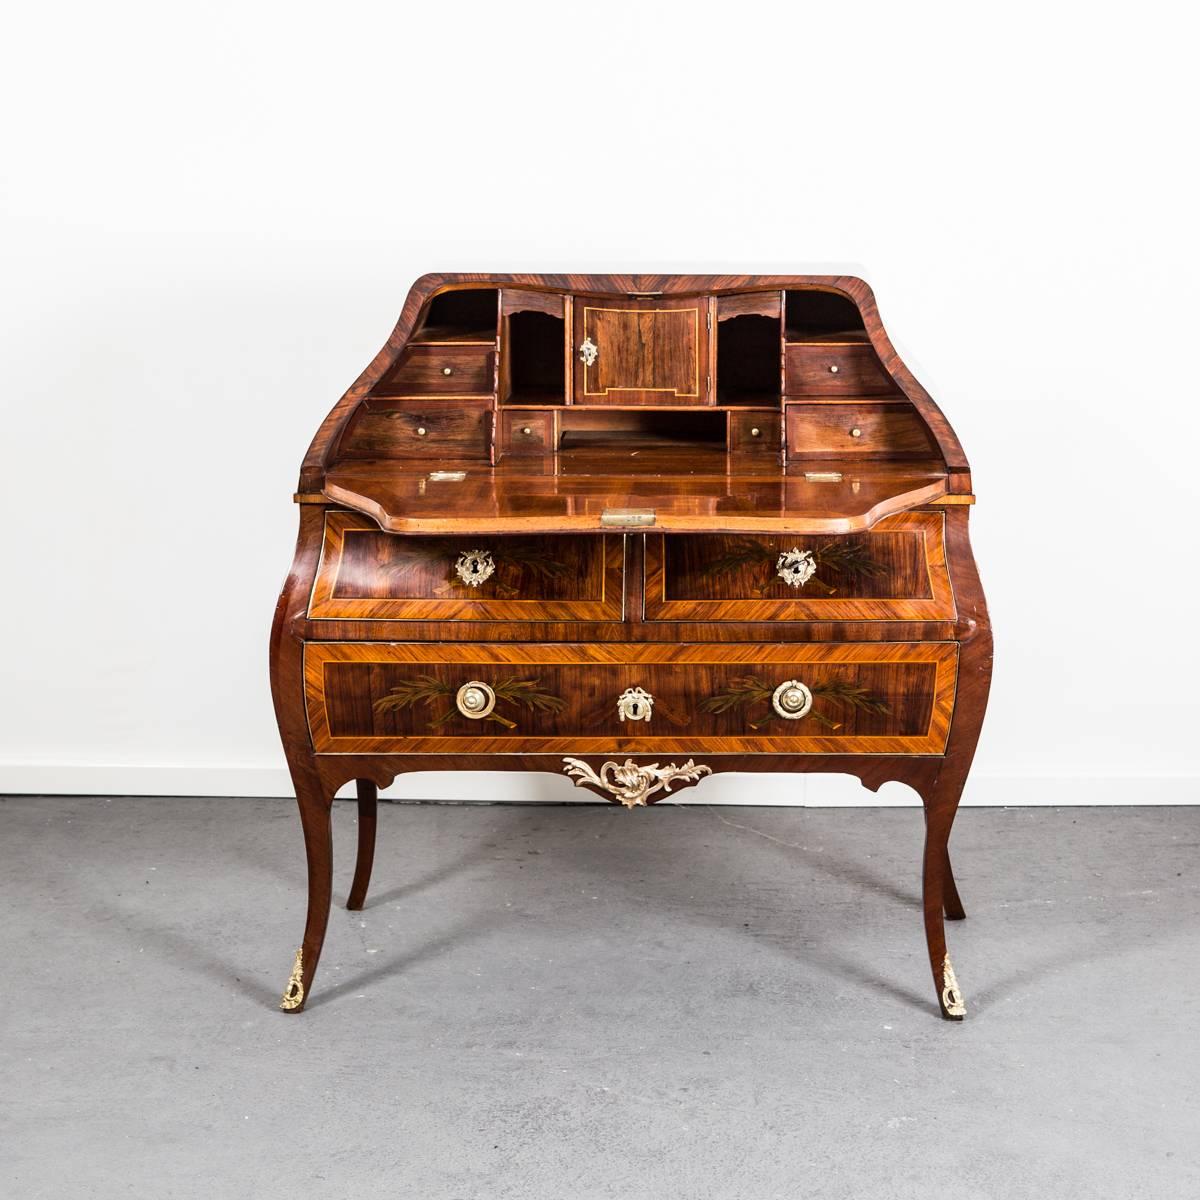 A secretary in highest quality made during the transition between Rococo period and the Gustavian period in Stockholm Sweden 1770-1775. Veneered with rosewood and richly decorated with colored fruit wood with details such as tulip flowers, letters,